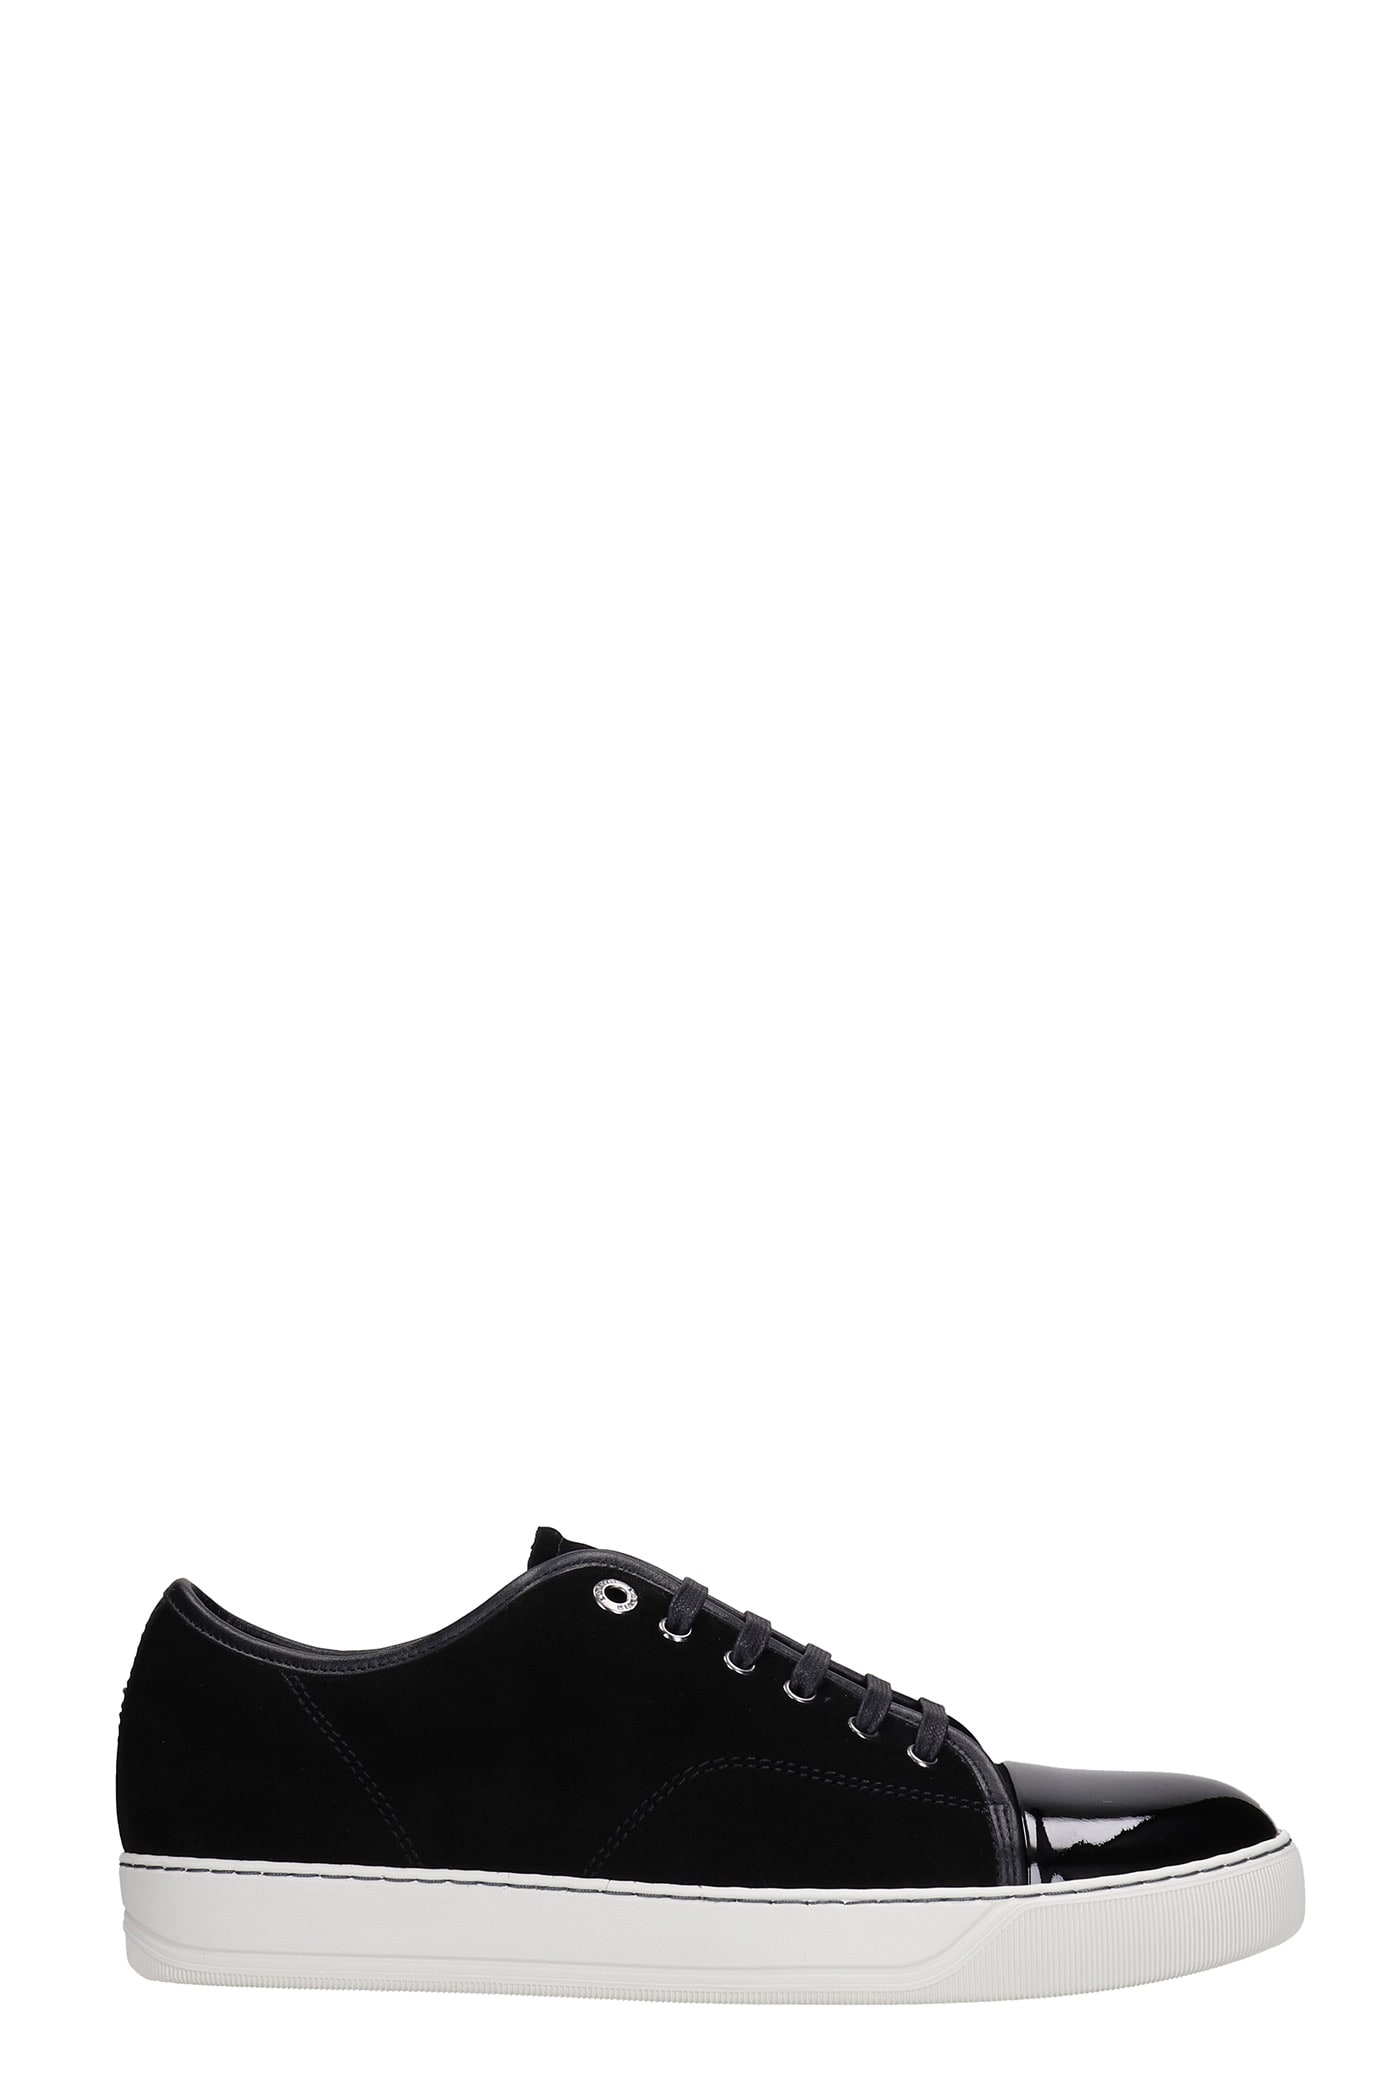 Lanvin Dbb1 Sneakers In Black Suede And Leather